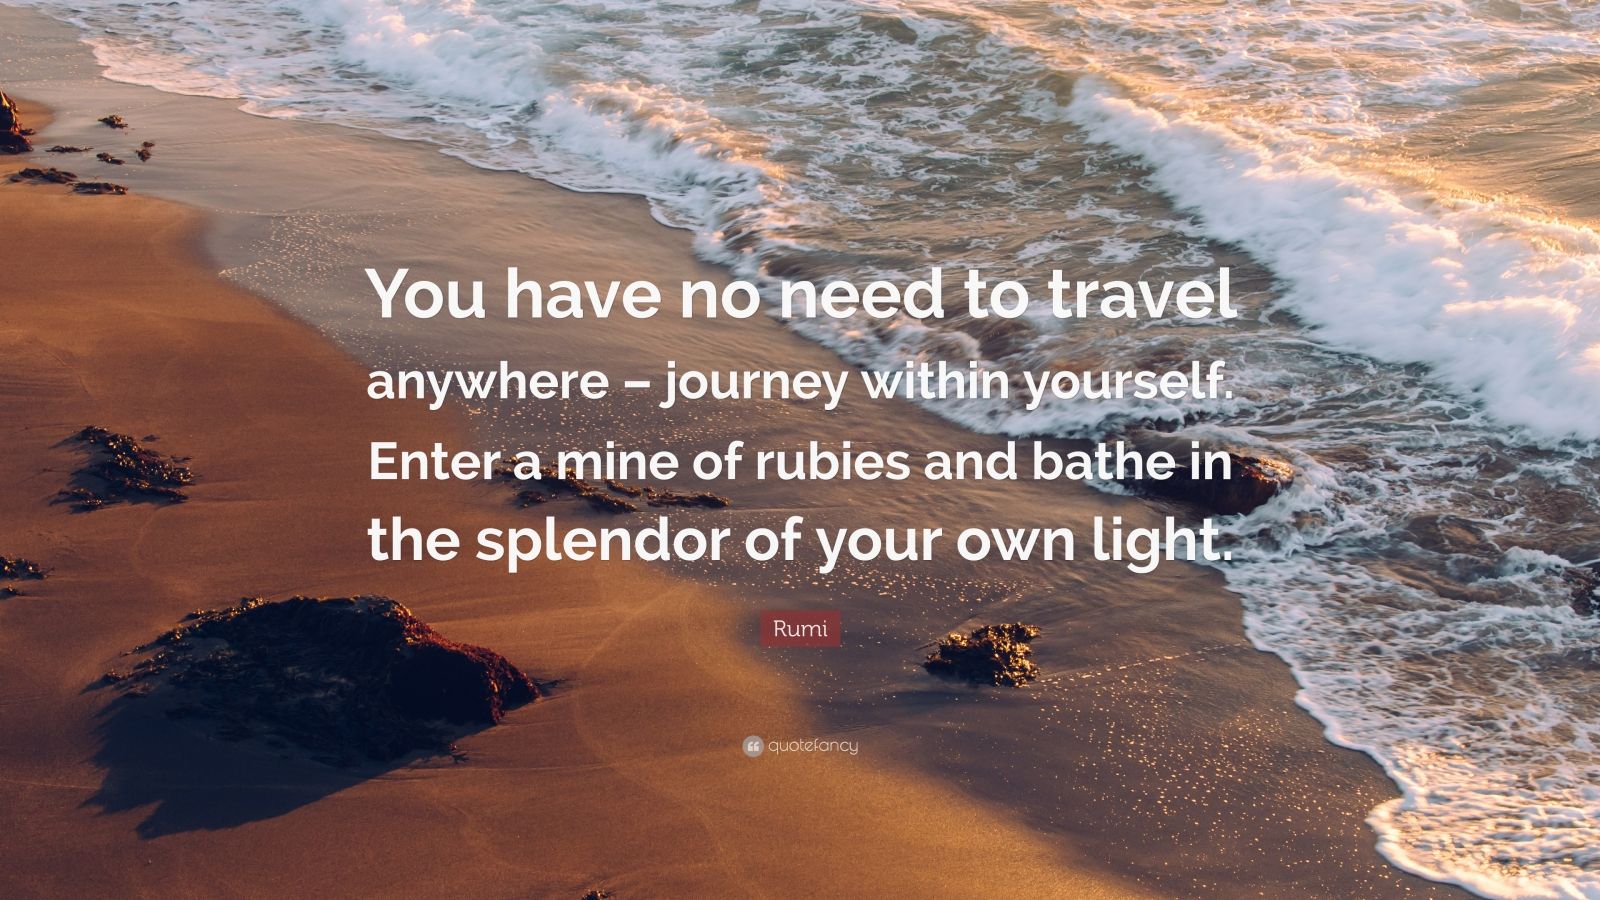 Rumi Quote: “You have no need to travel anywhere – journey within